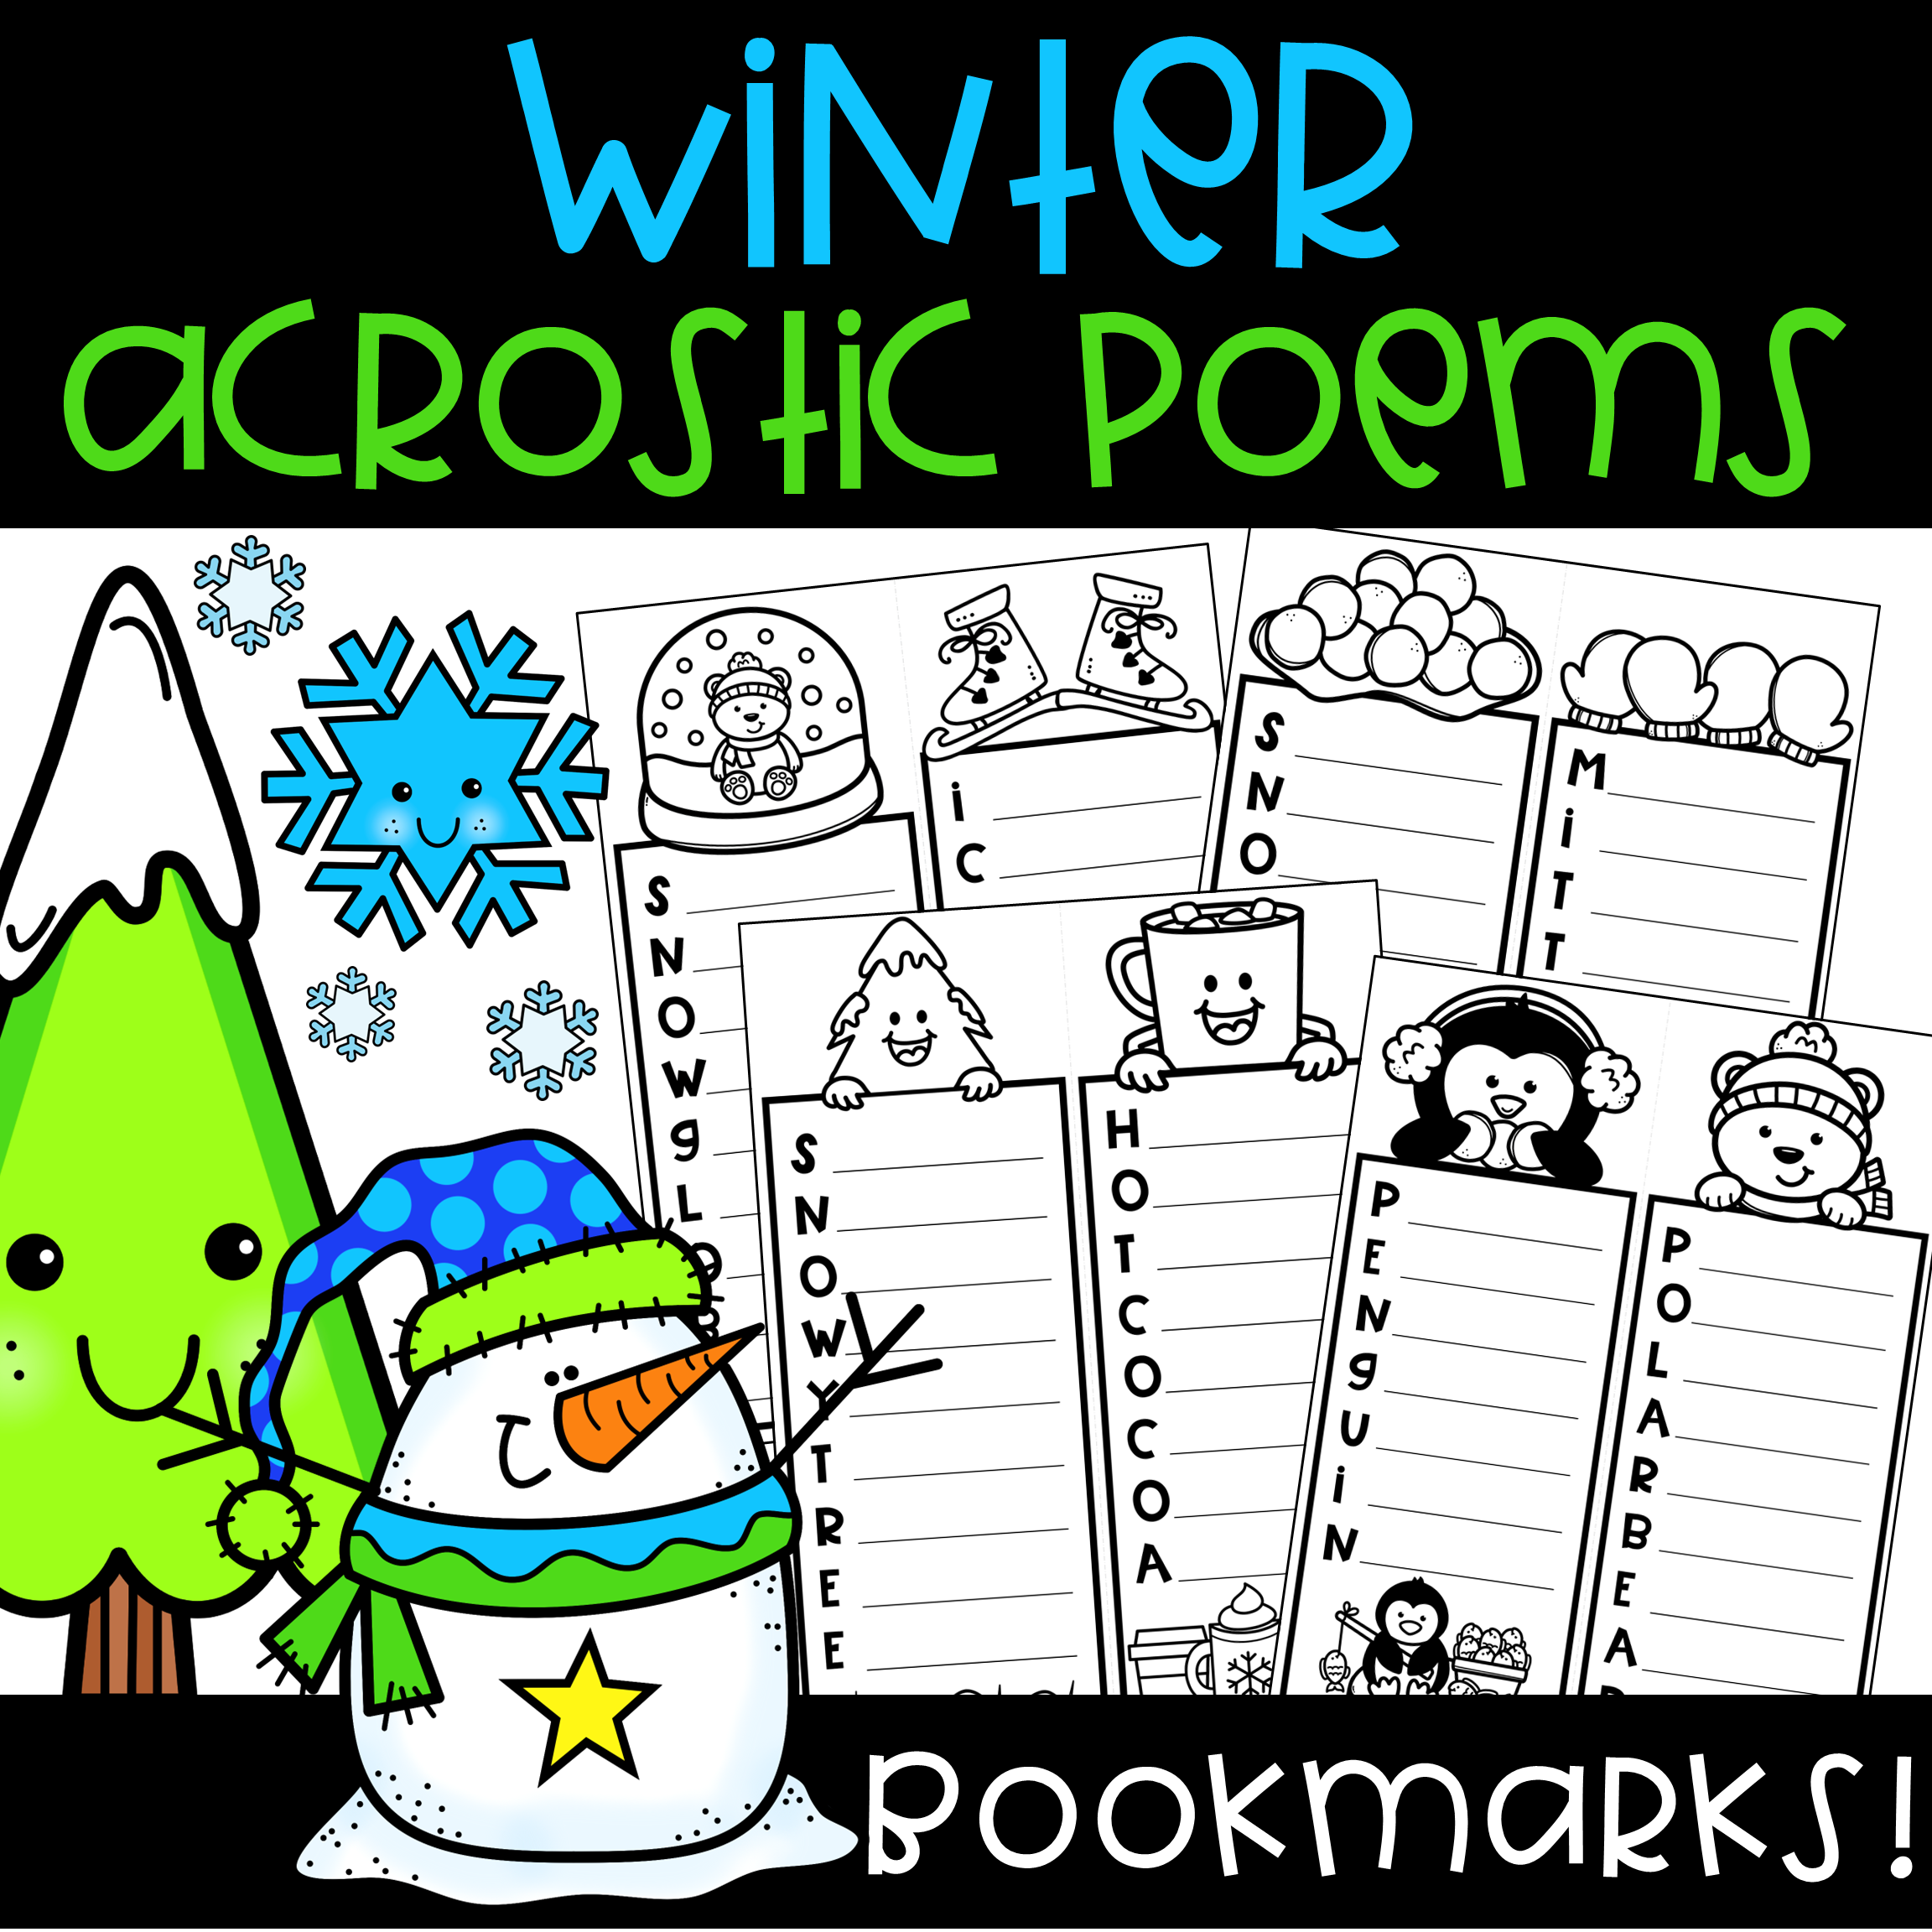 Winter acrostic poem bookmark winter creative writing winter poetry made by teachers